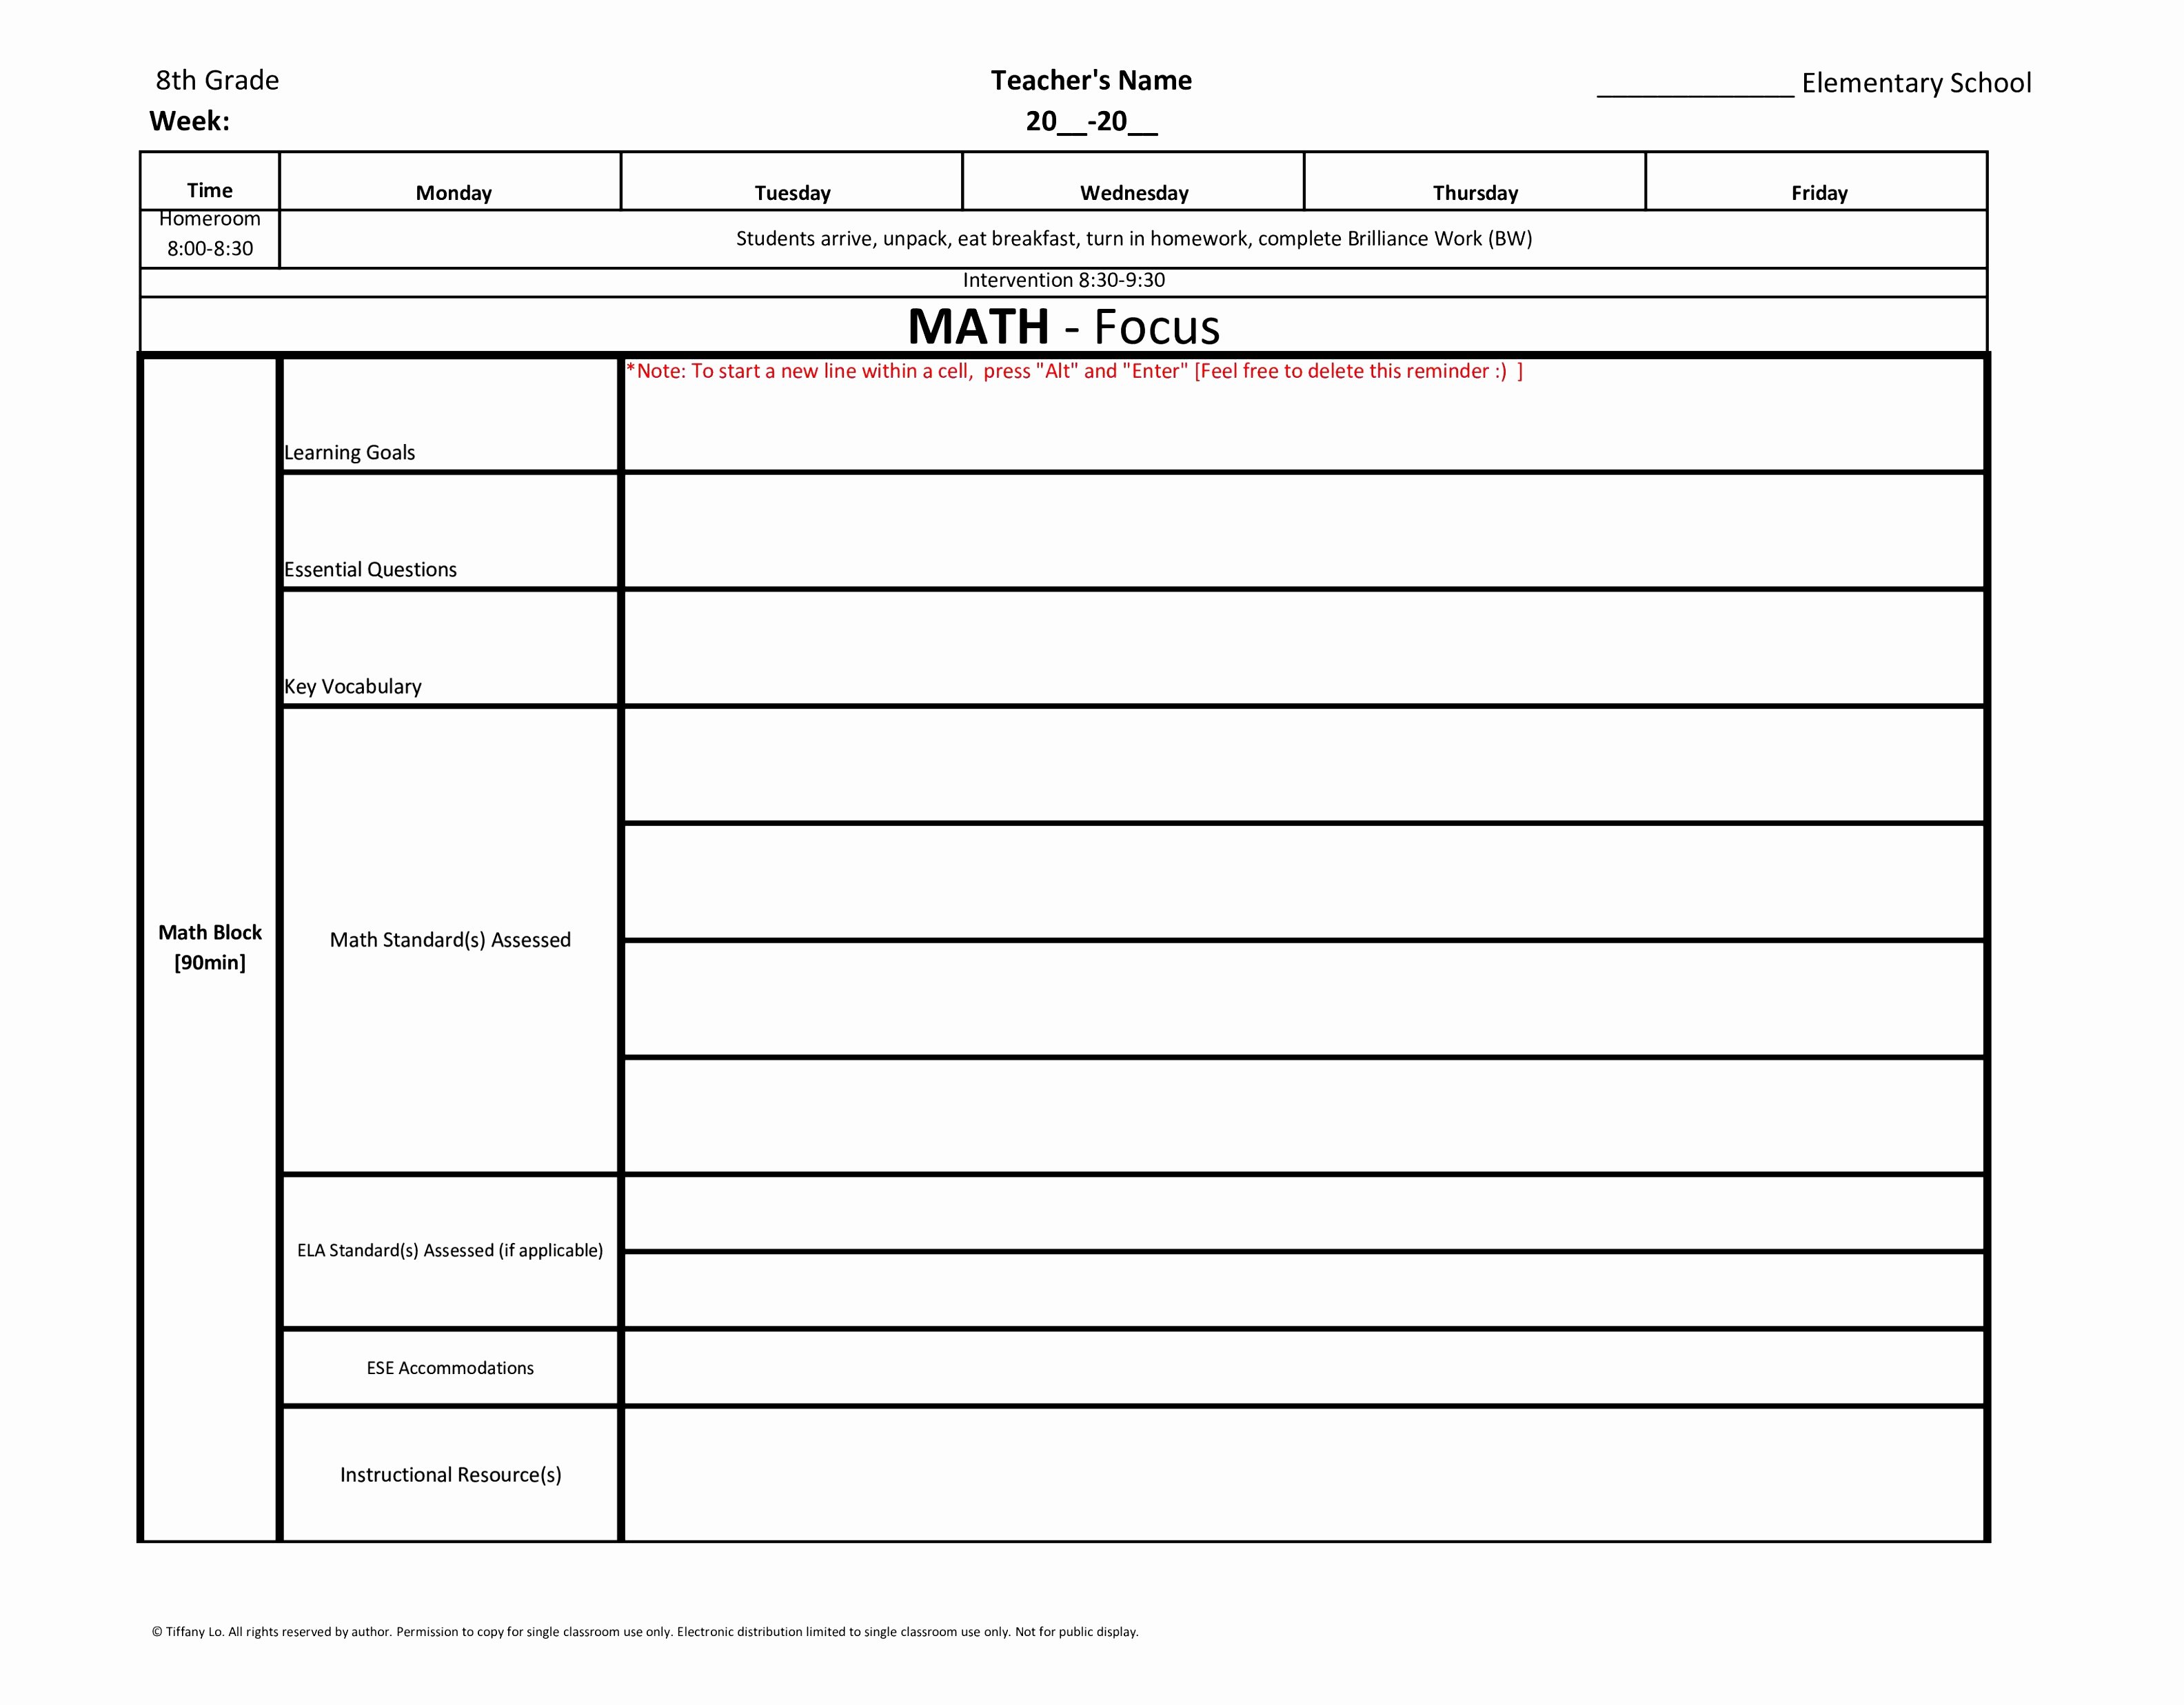 Weekly Lesson Plan Template Doc Unique 10 Weekly Lesson Plan Templates for Elementary Teachers